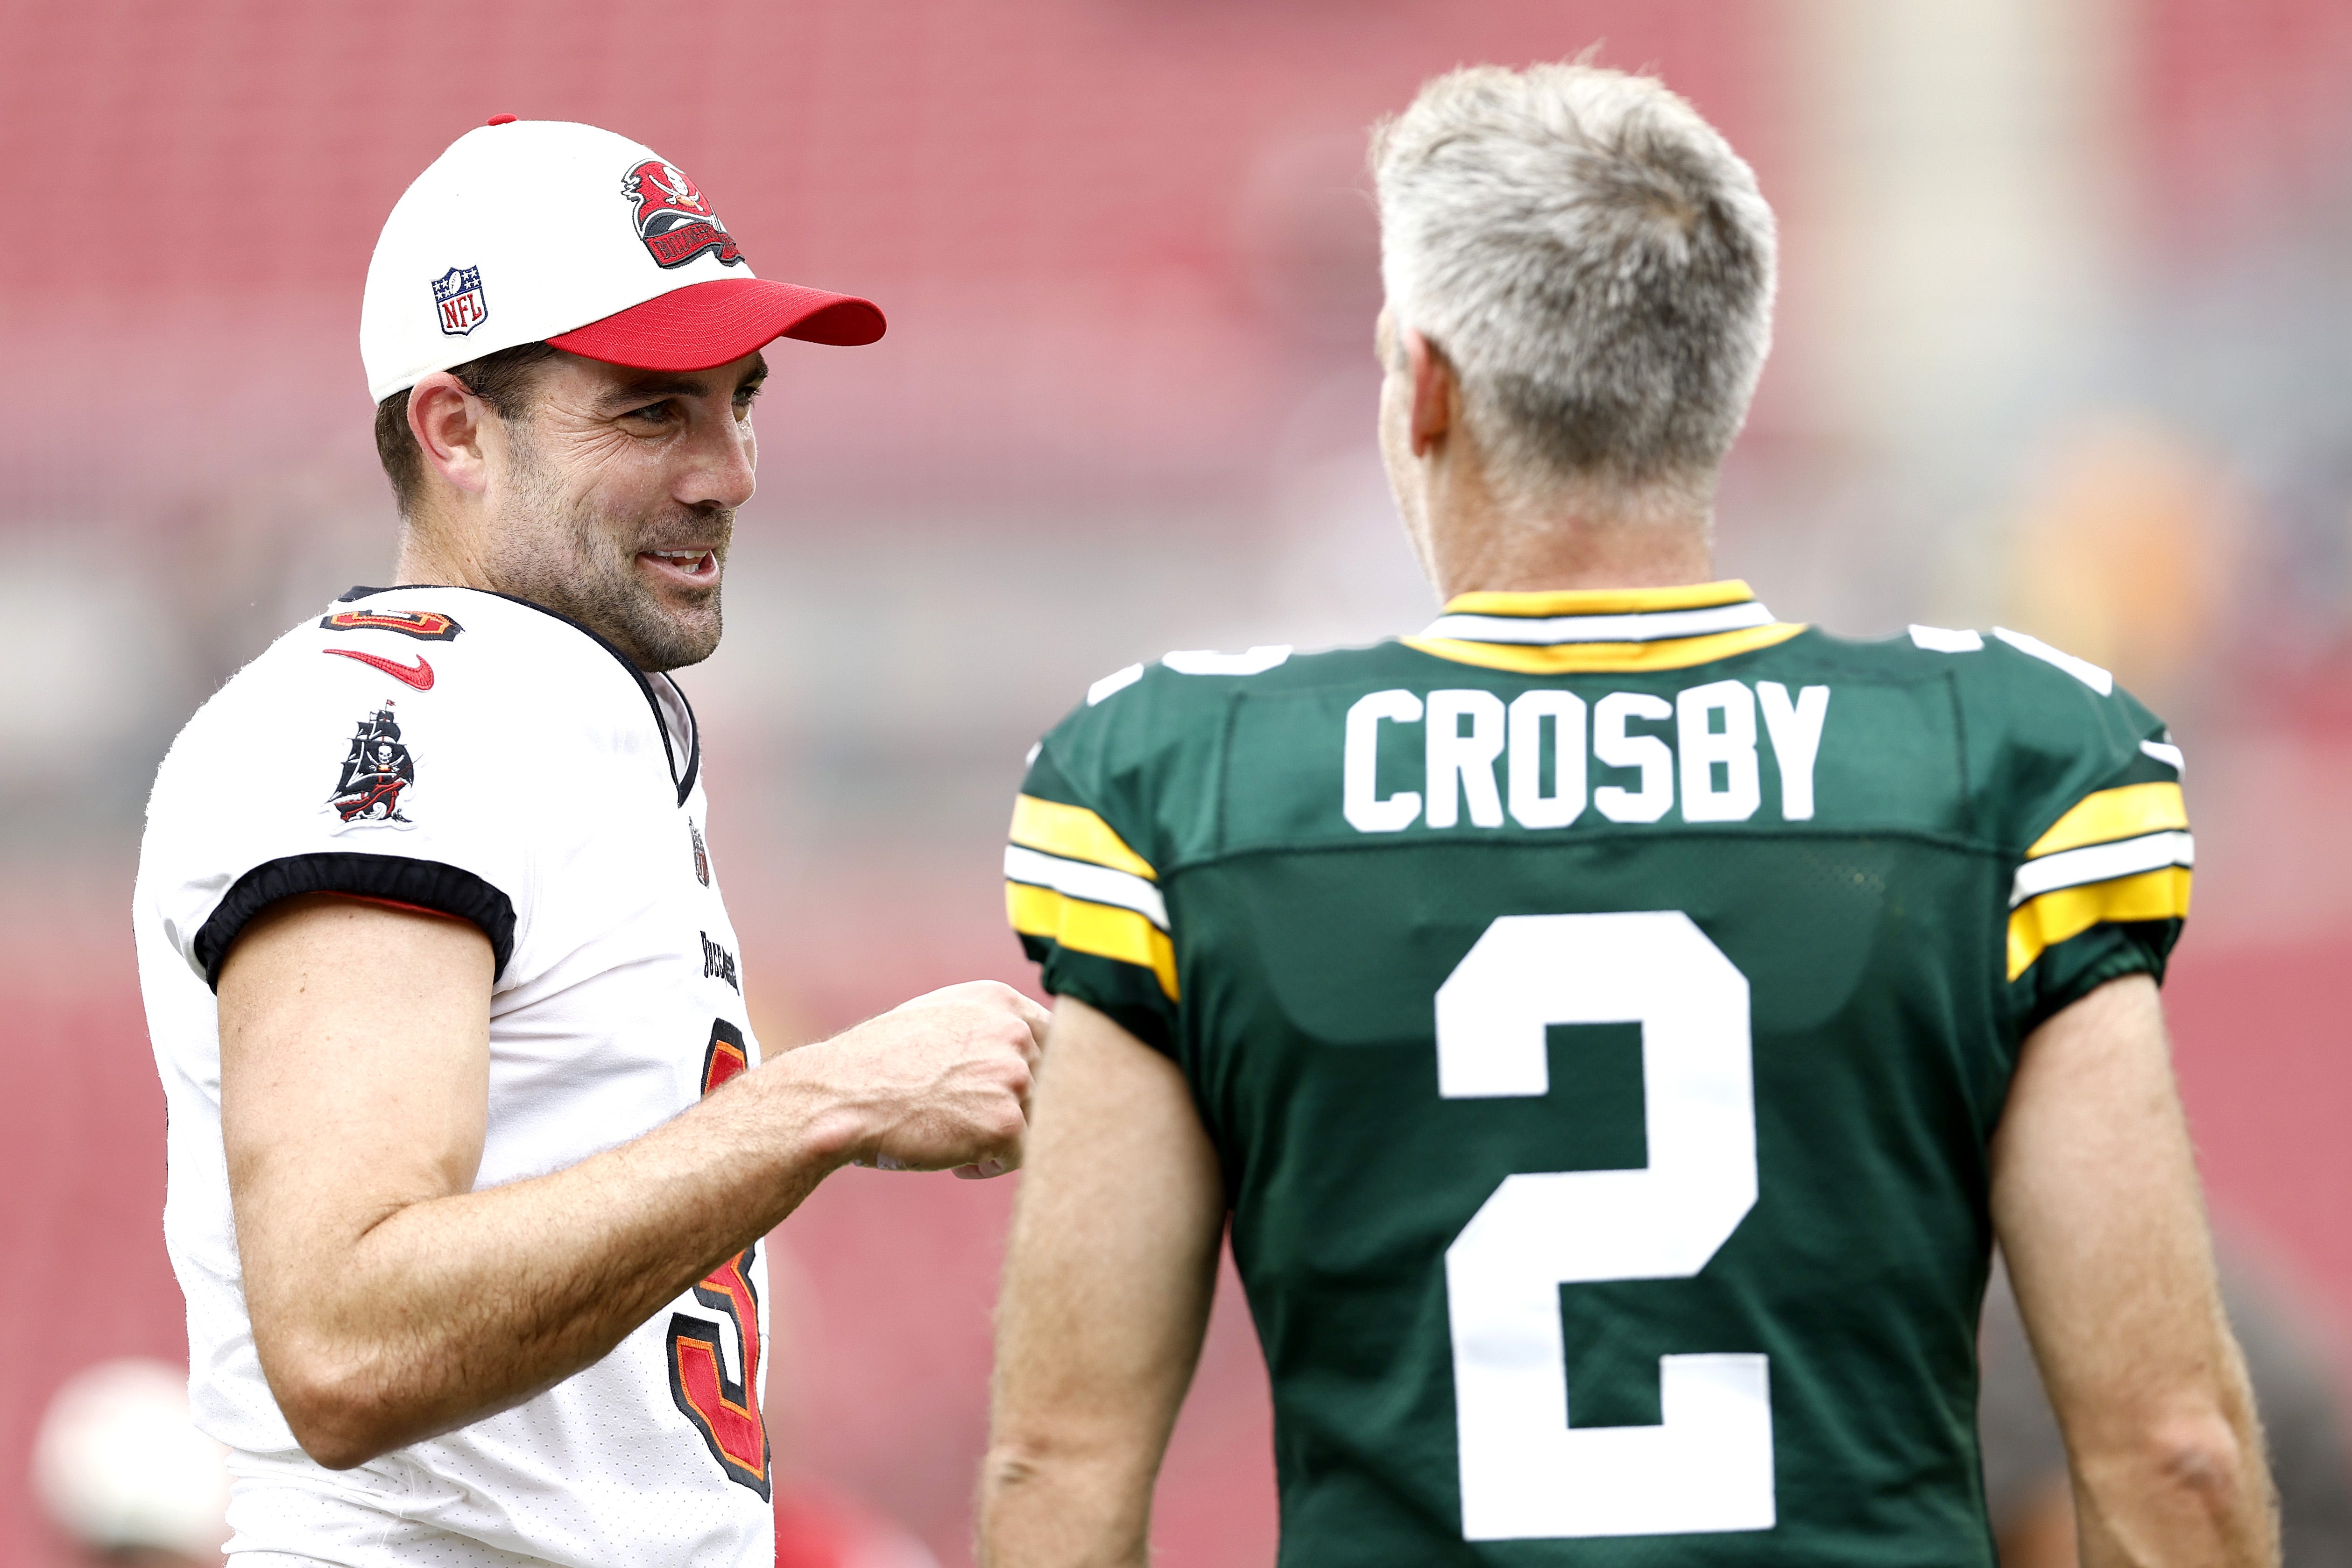 Ryan Succop (3) of the Tampa Bay Buccaneers talks with Mason Crosby (2) of the Green Bay Packers prior to the game on Sept. 25, 2022, at Raymond James Stadium in Tampa, Florida.